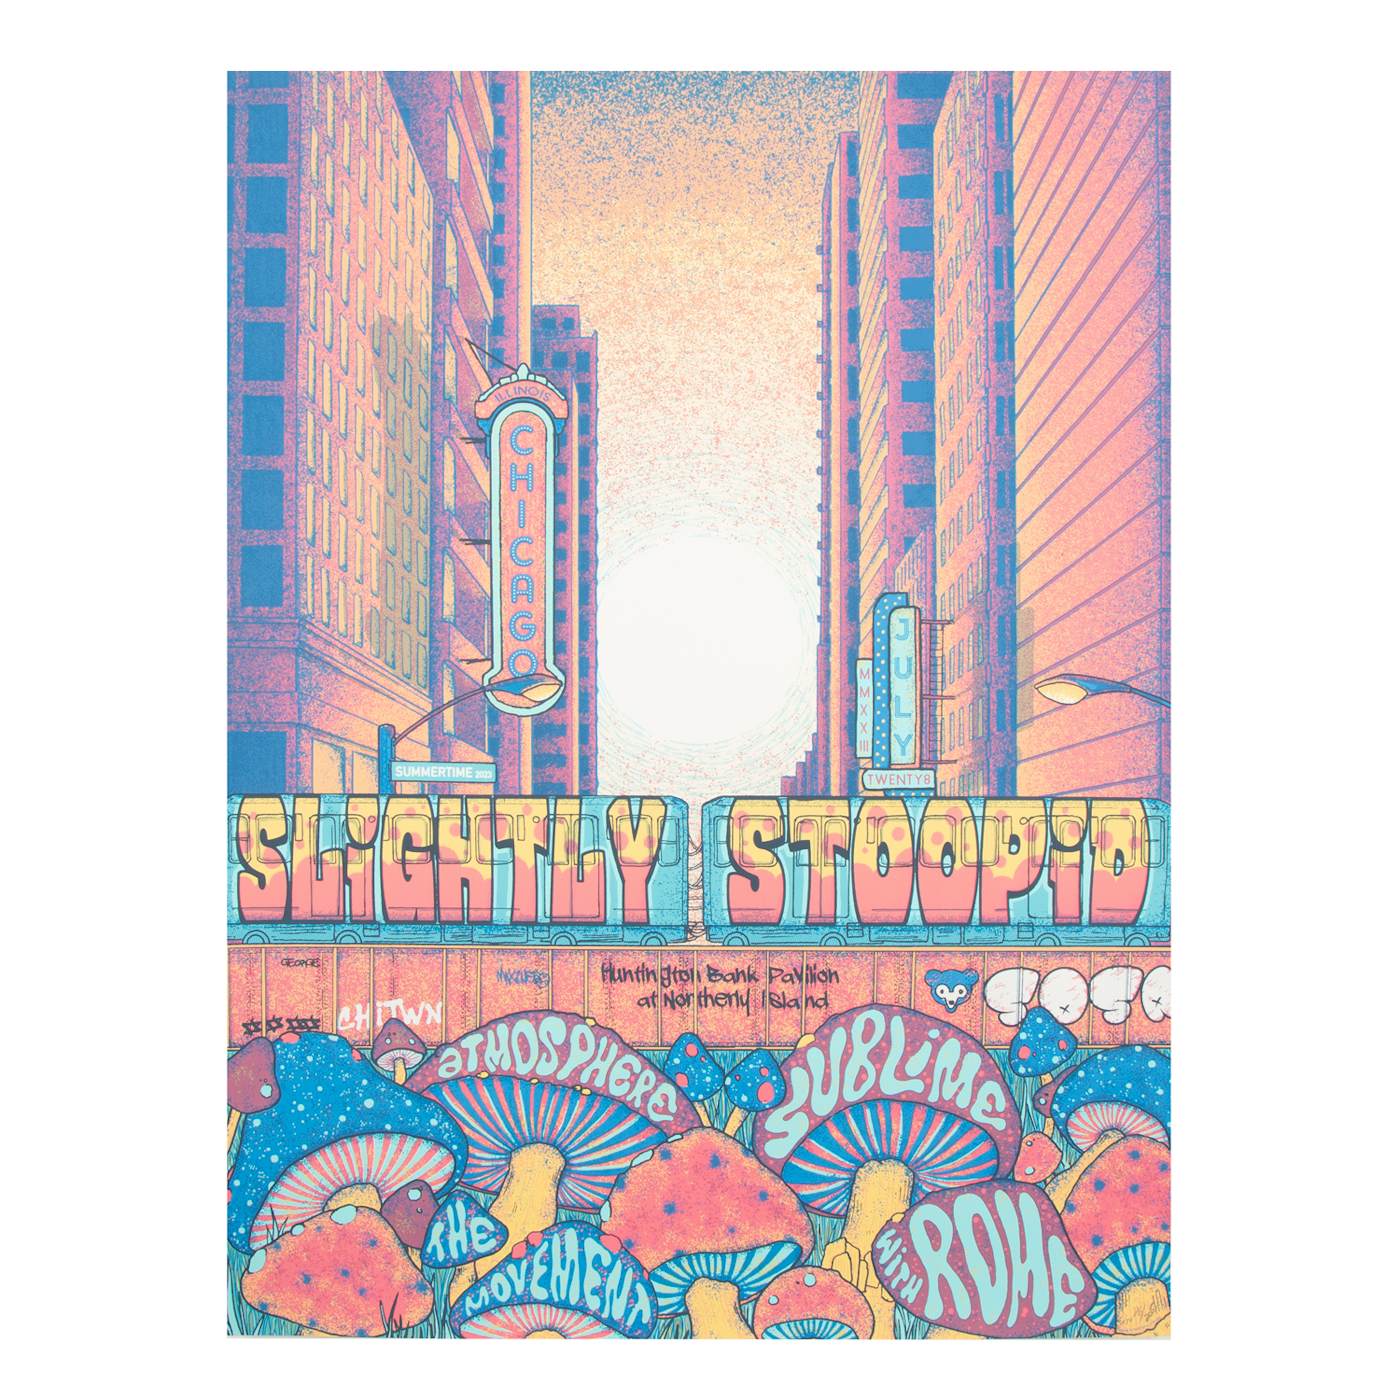 Slightly Stoopid 7/28/23 Chicago, IL Show Poster by Max Wesoloski